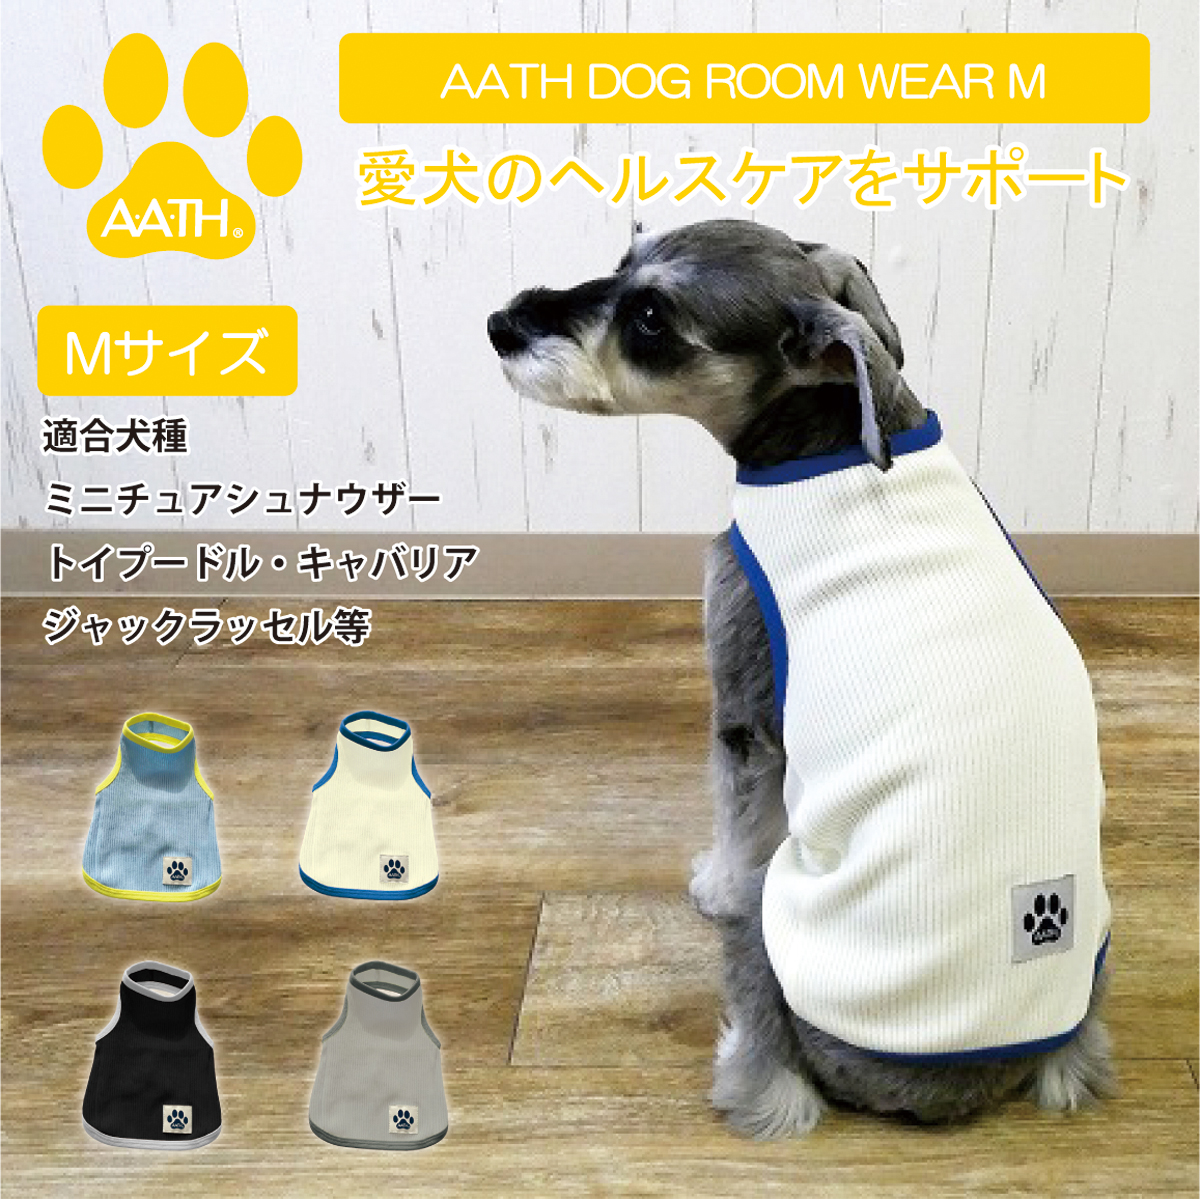 AATH for Dogs